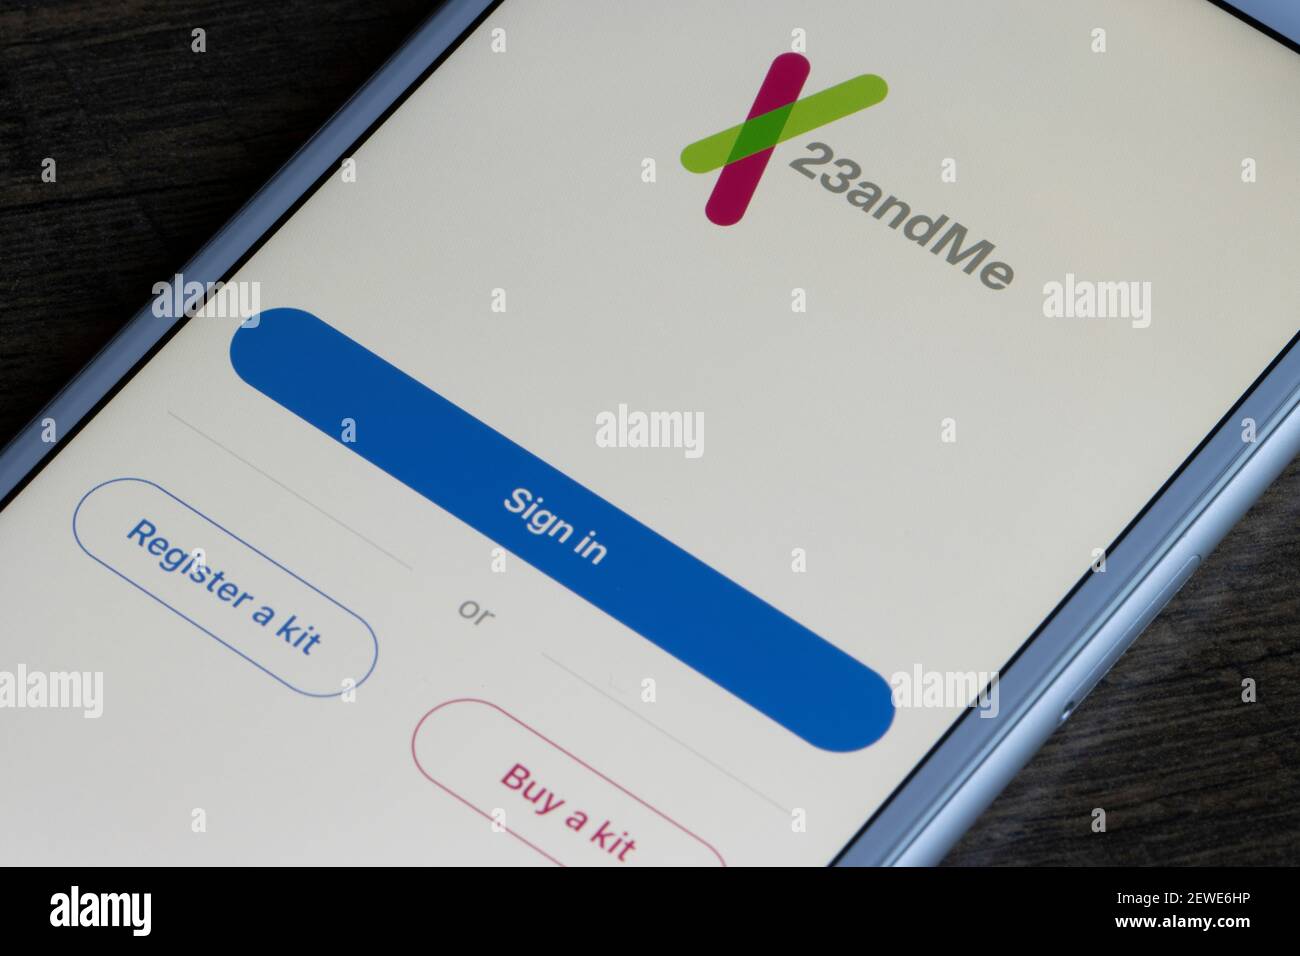 23andMe mobile app login page is seen on an iPhone. 23andMe is an American personal genomics and biotechnology company. Stock Photo